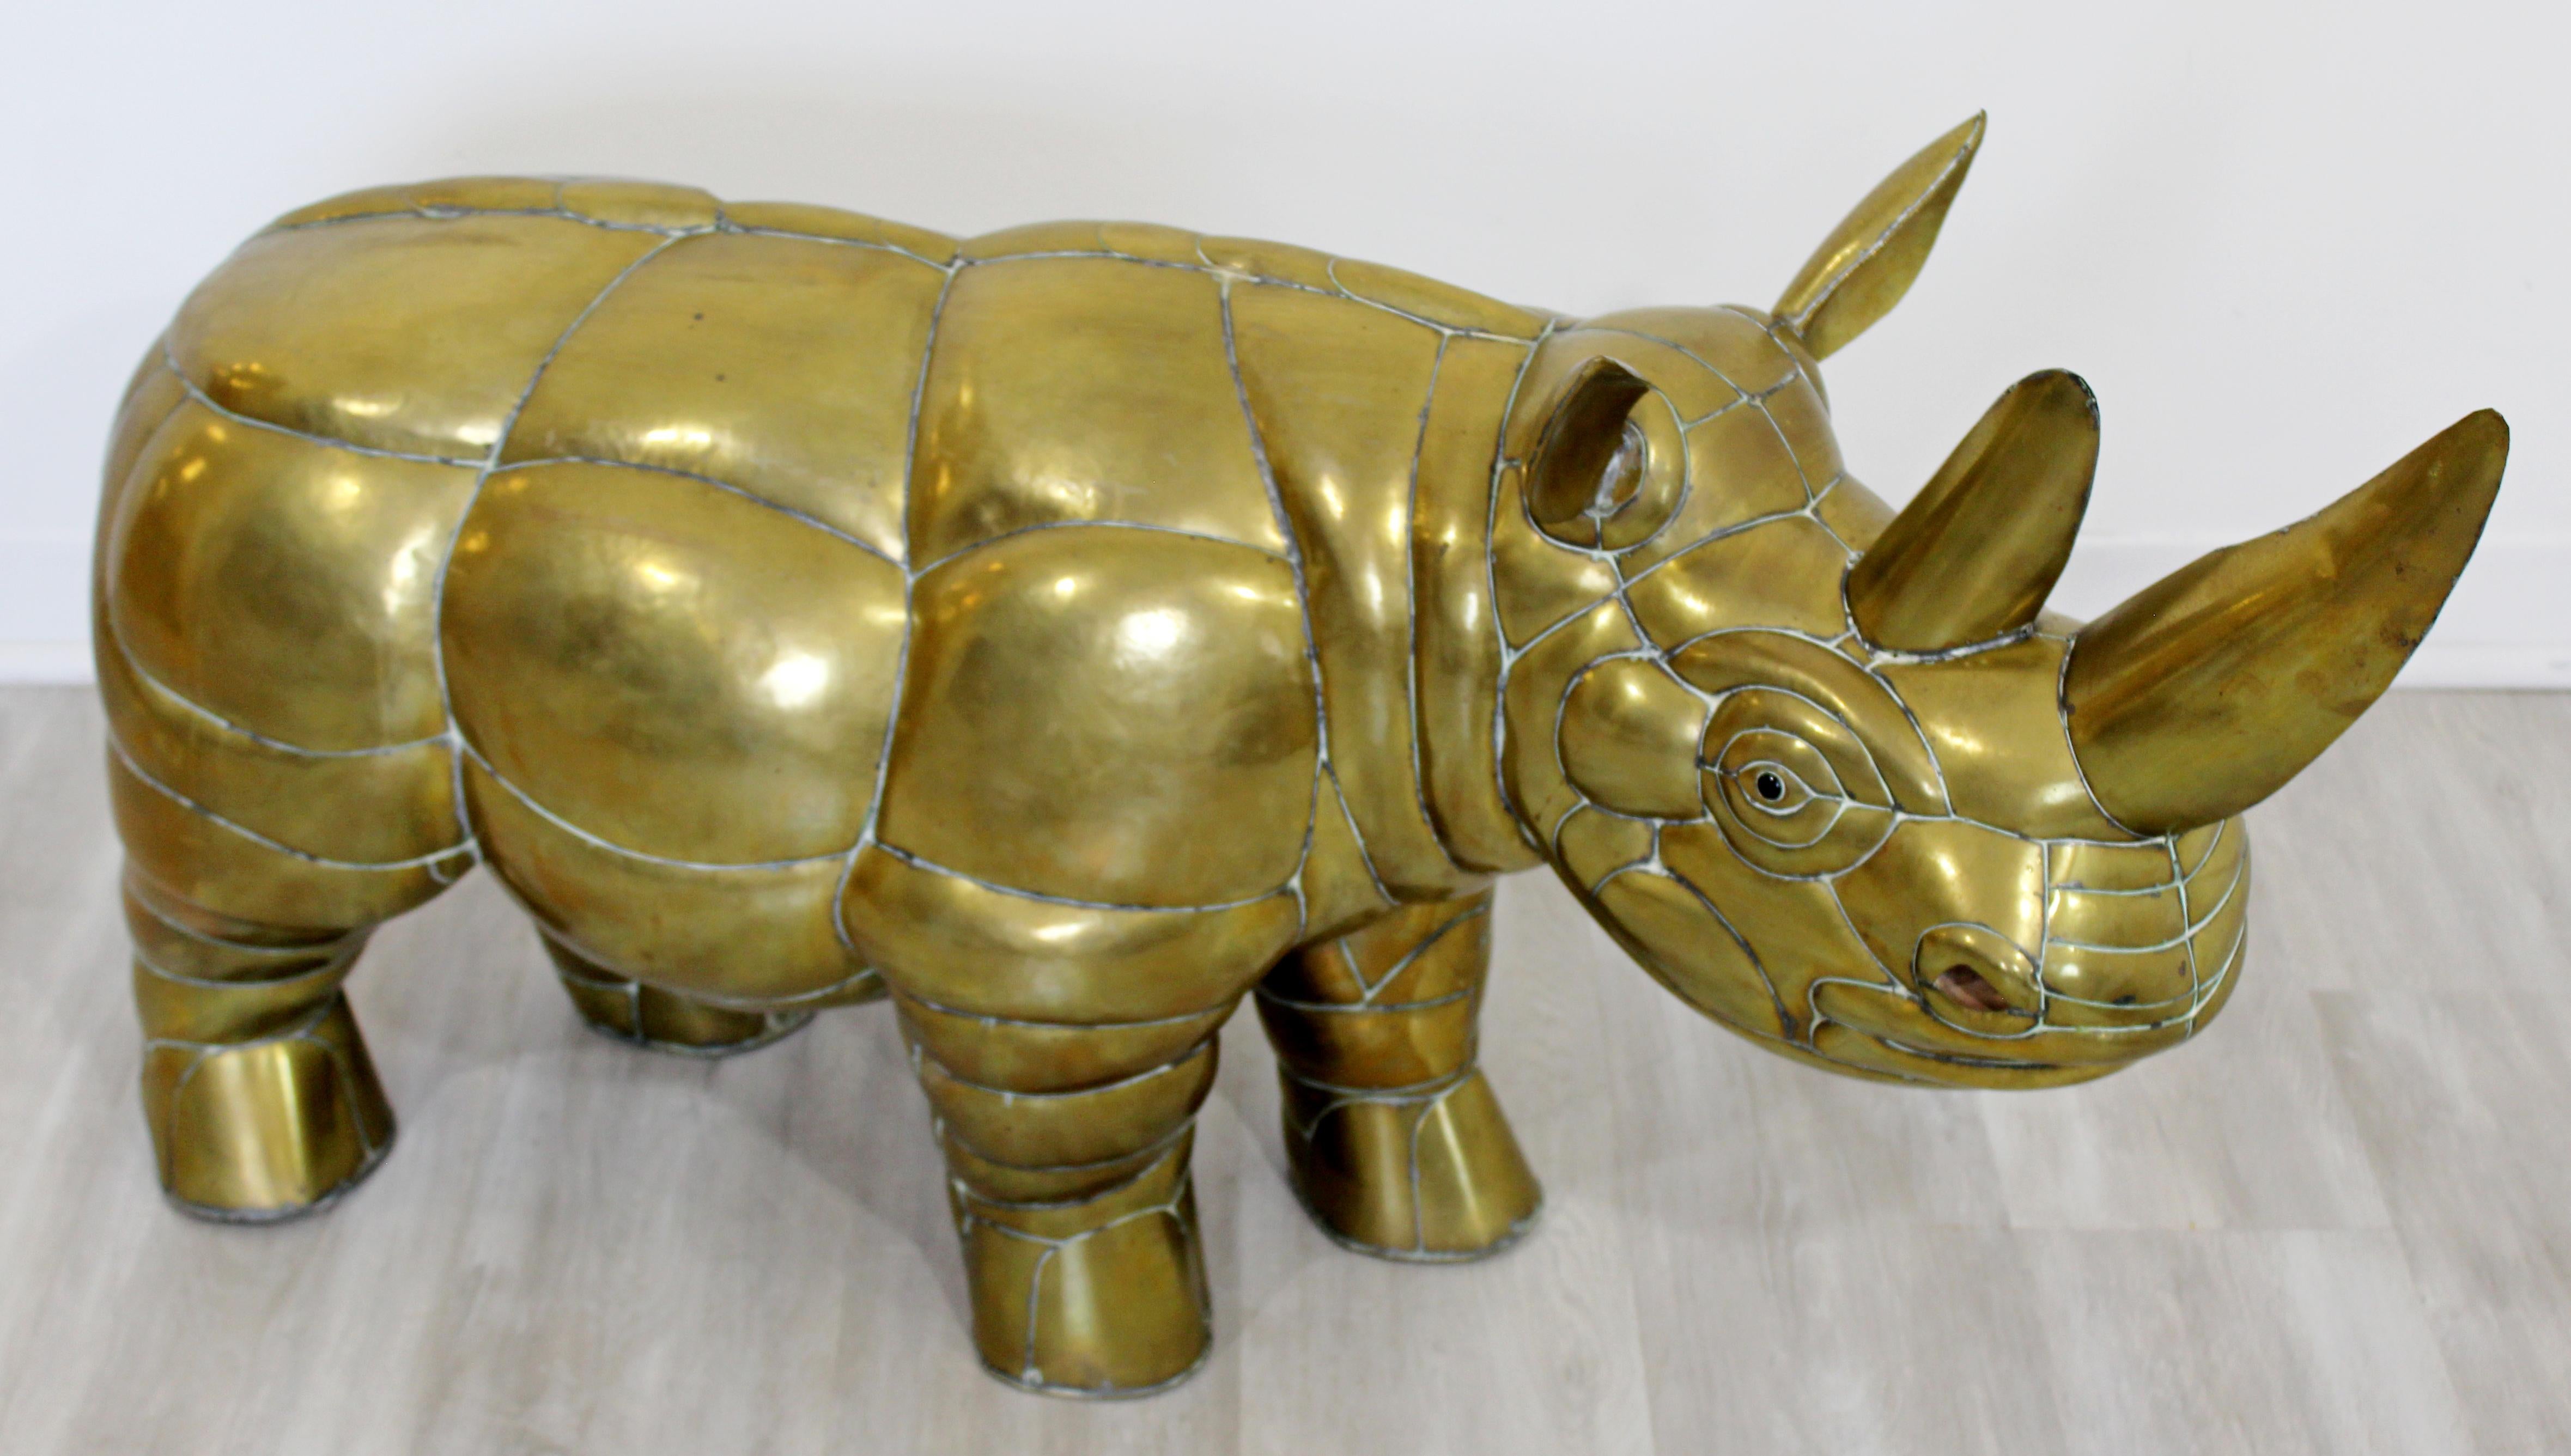 For your consideration is an eclectic, brass table or floor sculpture of a rhino, by Mexican artist Sergio Bustamante, circa 1970s. In excellent vintage condition. The dimensions are 44